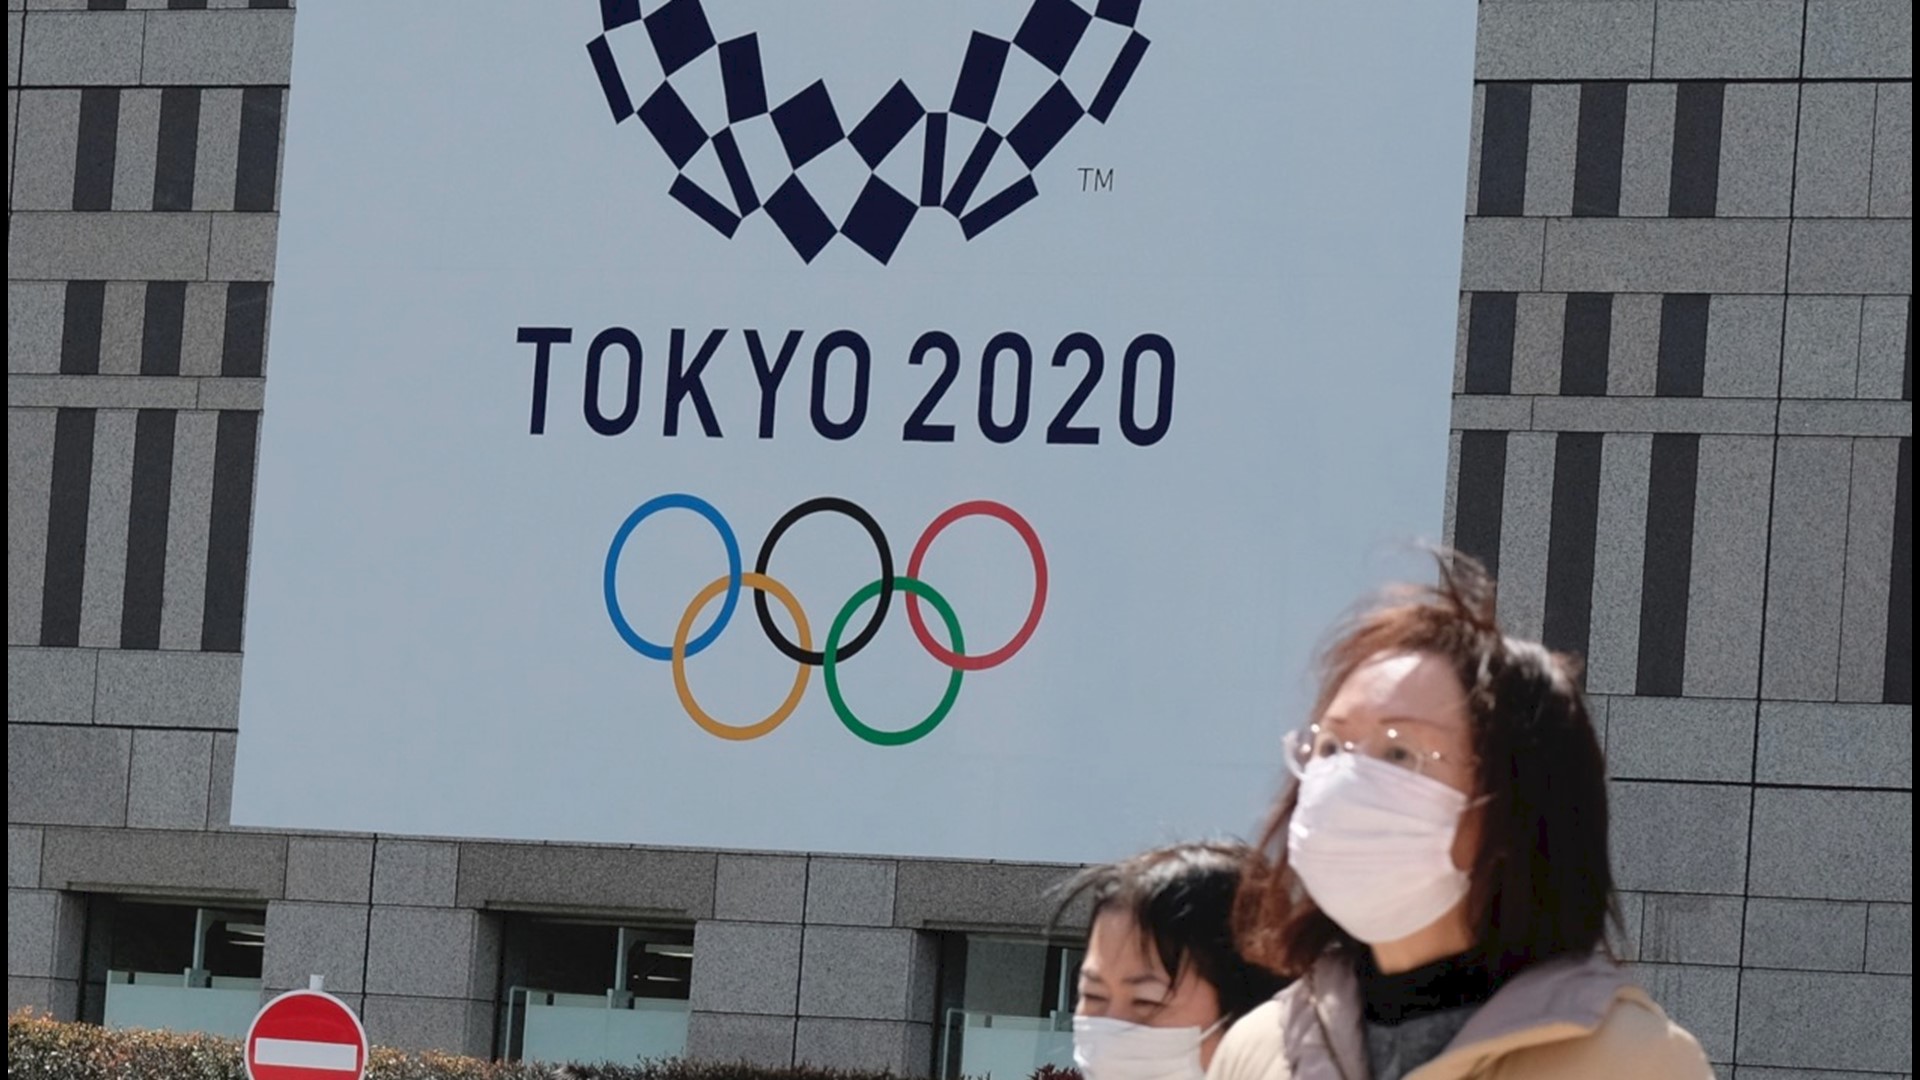 The International Olympic Committee has announced the official new dates for the Tokyo 2020 Summer Olympics. Buzz60's TC Newman has the details on how long sports fans will have to wait.